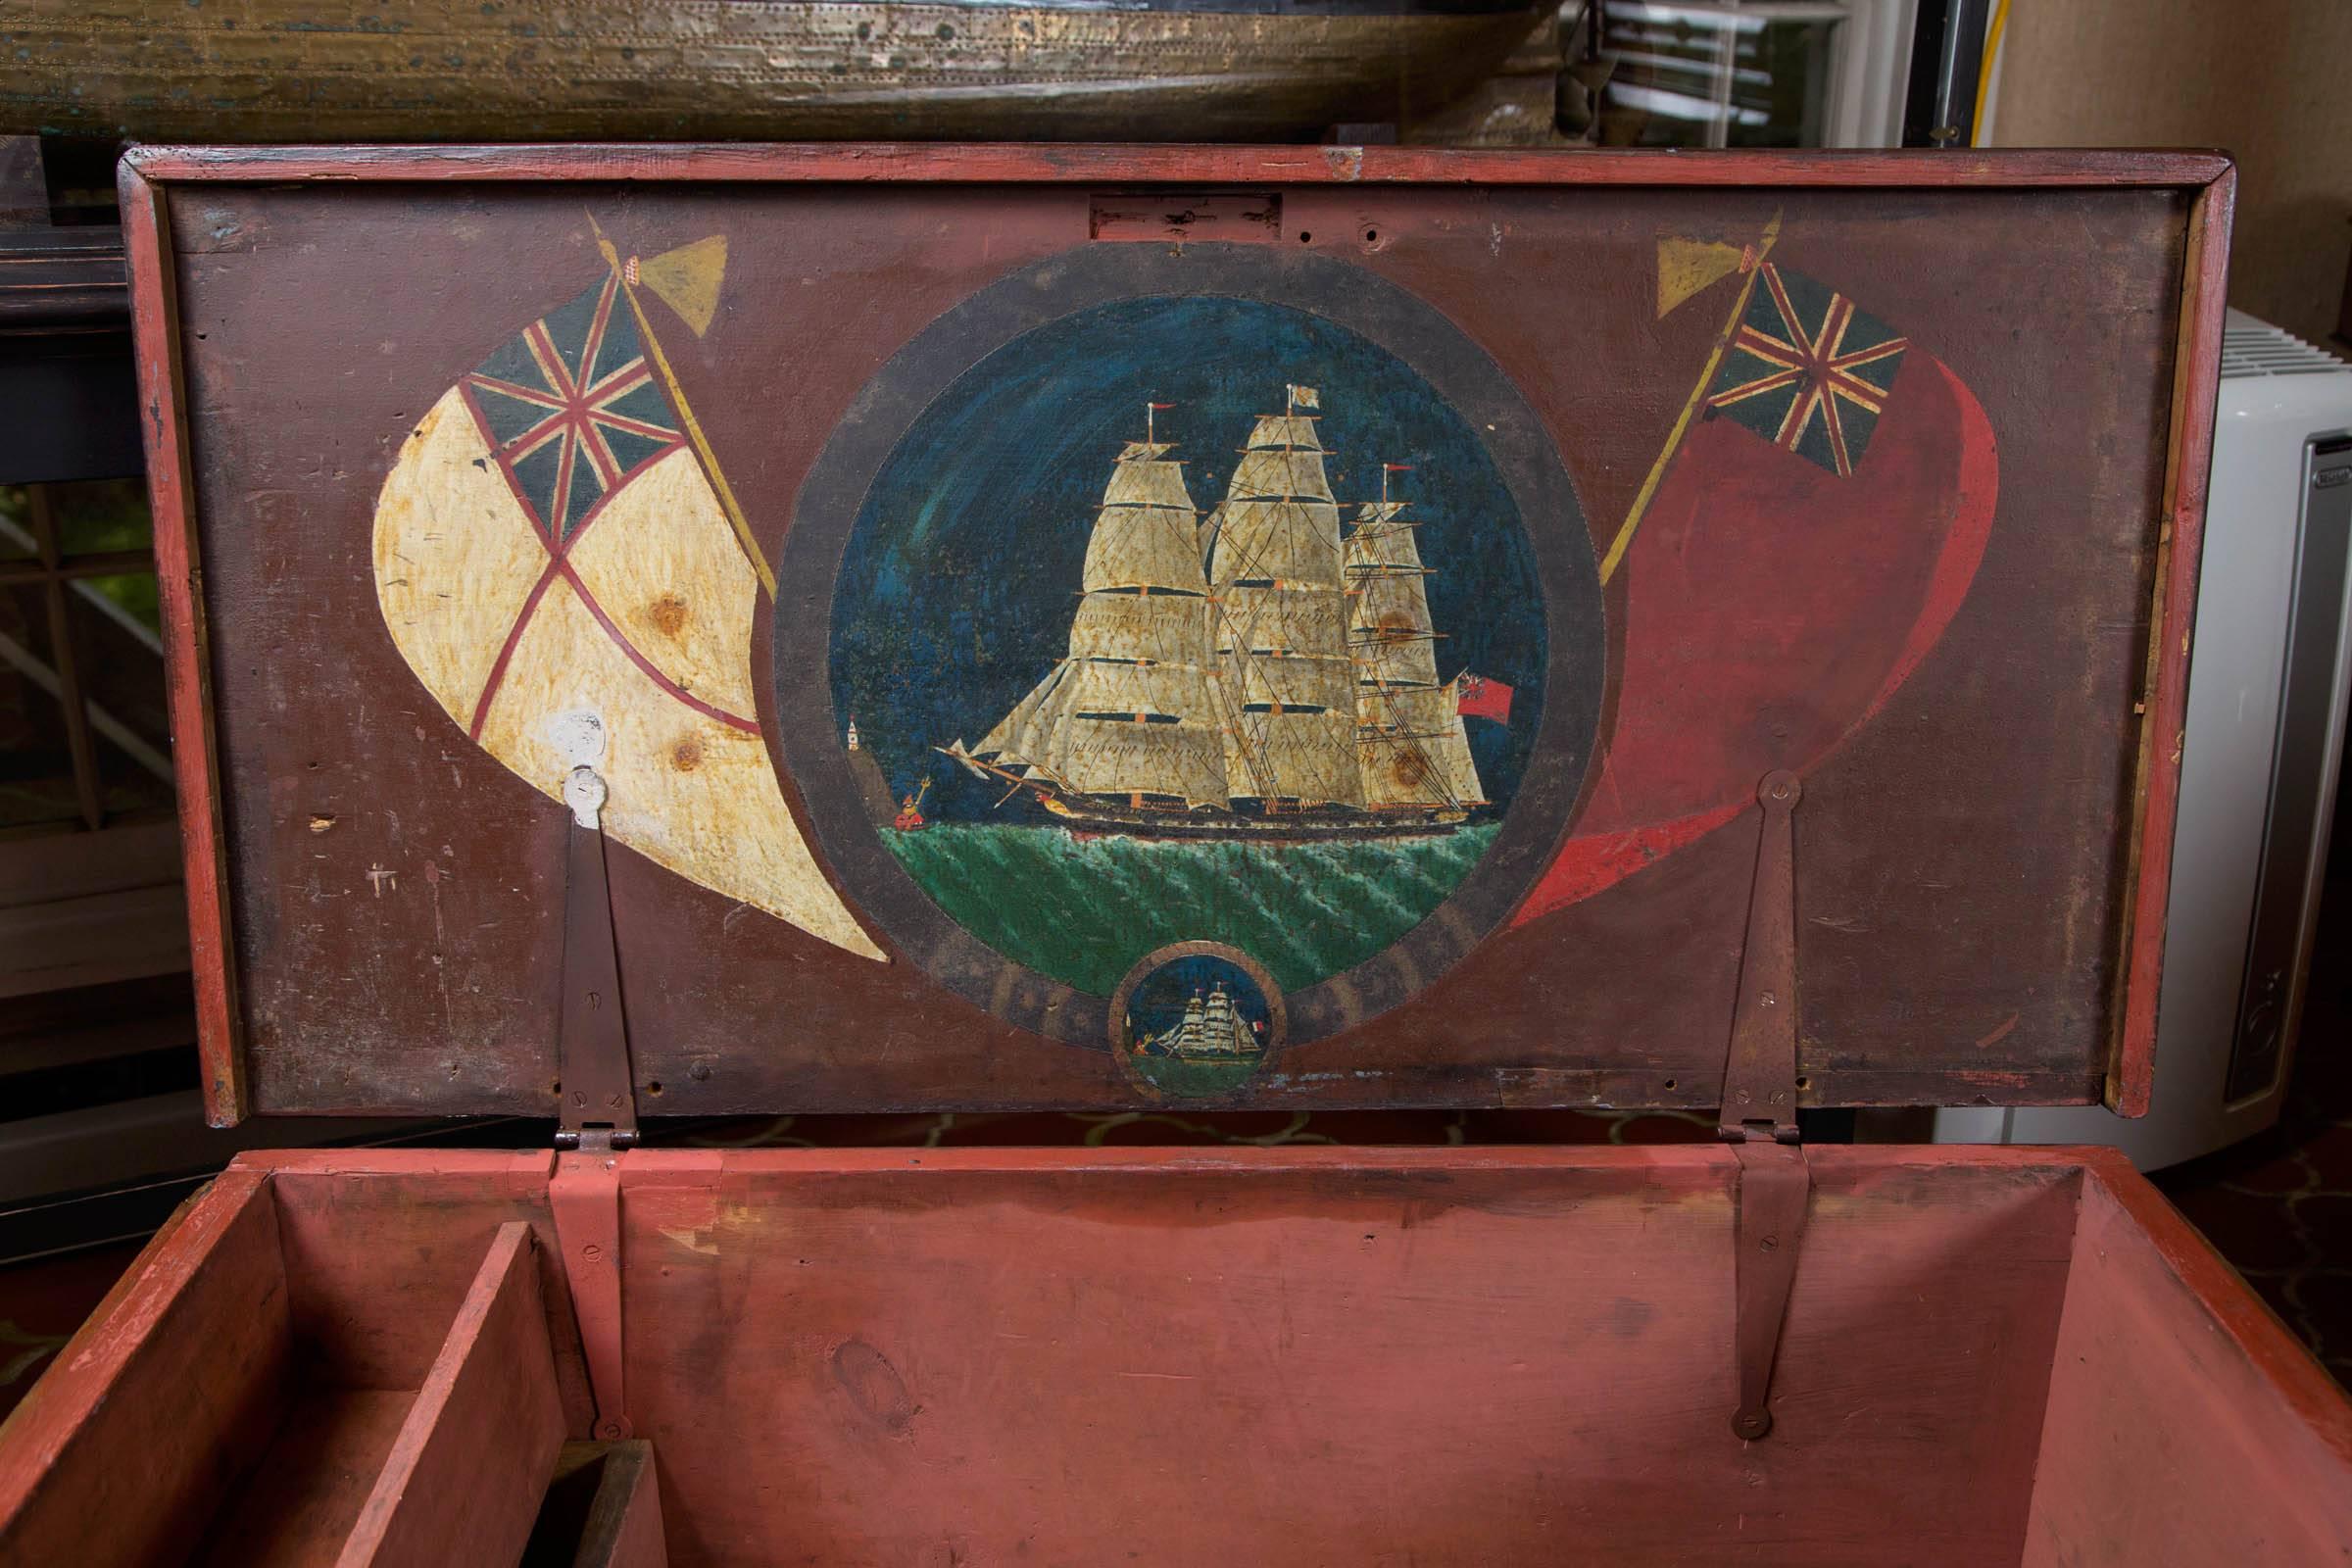 19th century Welsh seaman's painted sea chest.  When men went off to sea these chests contained all their worldly belongings that they would need for the coming years at sea.  Each chest is unique in its decoration.  A seaman would demonstrate his